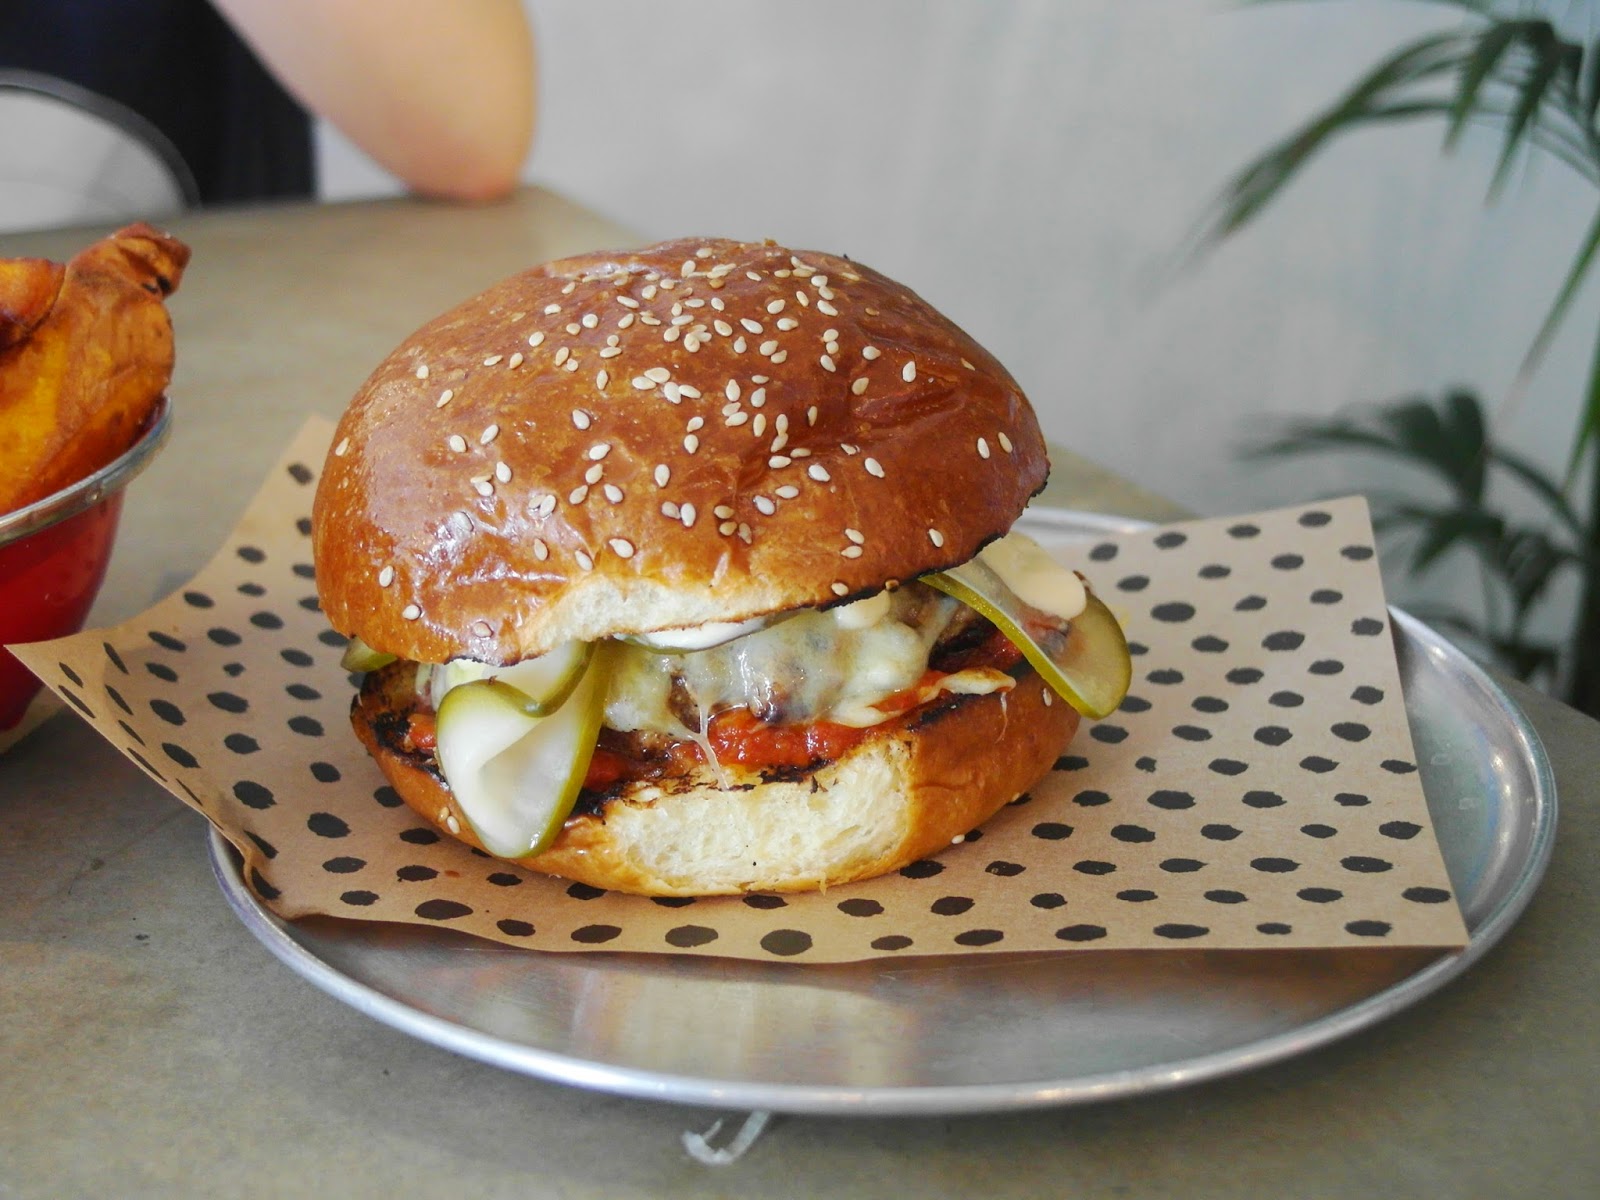 Chur Burger Sydney: Types of Burgers you should Try